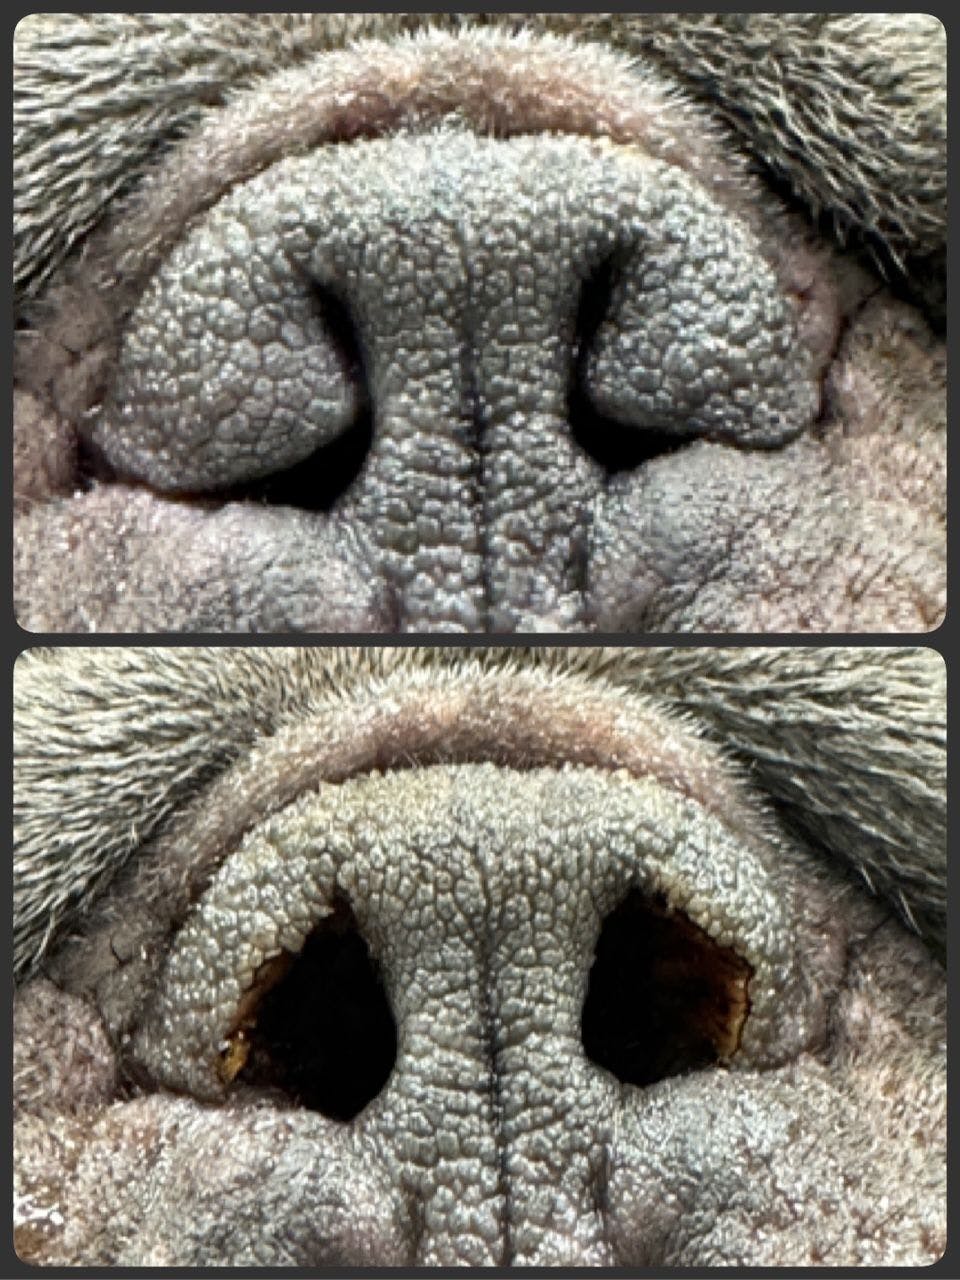 The patient is shown before (top) and after laser rhinoplasty (bottom).